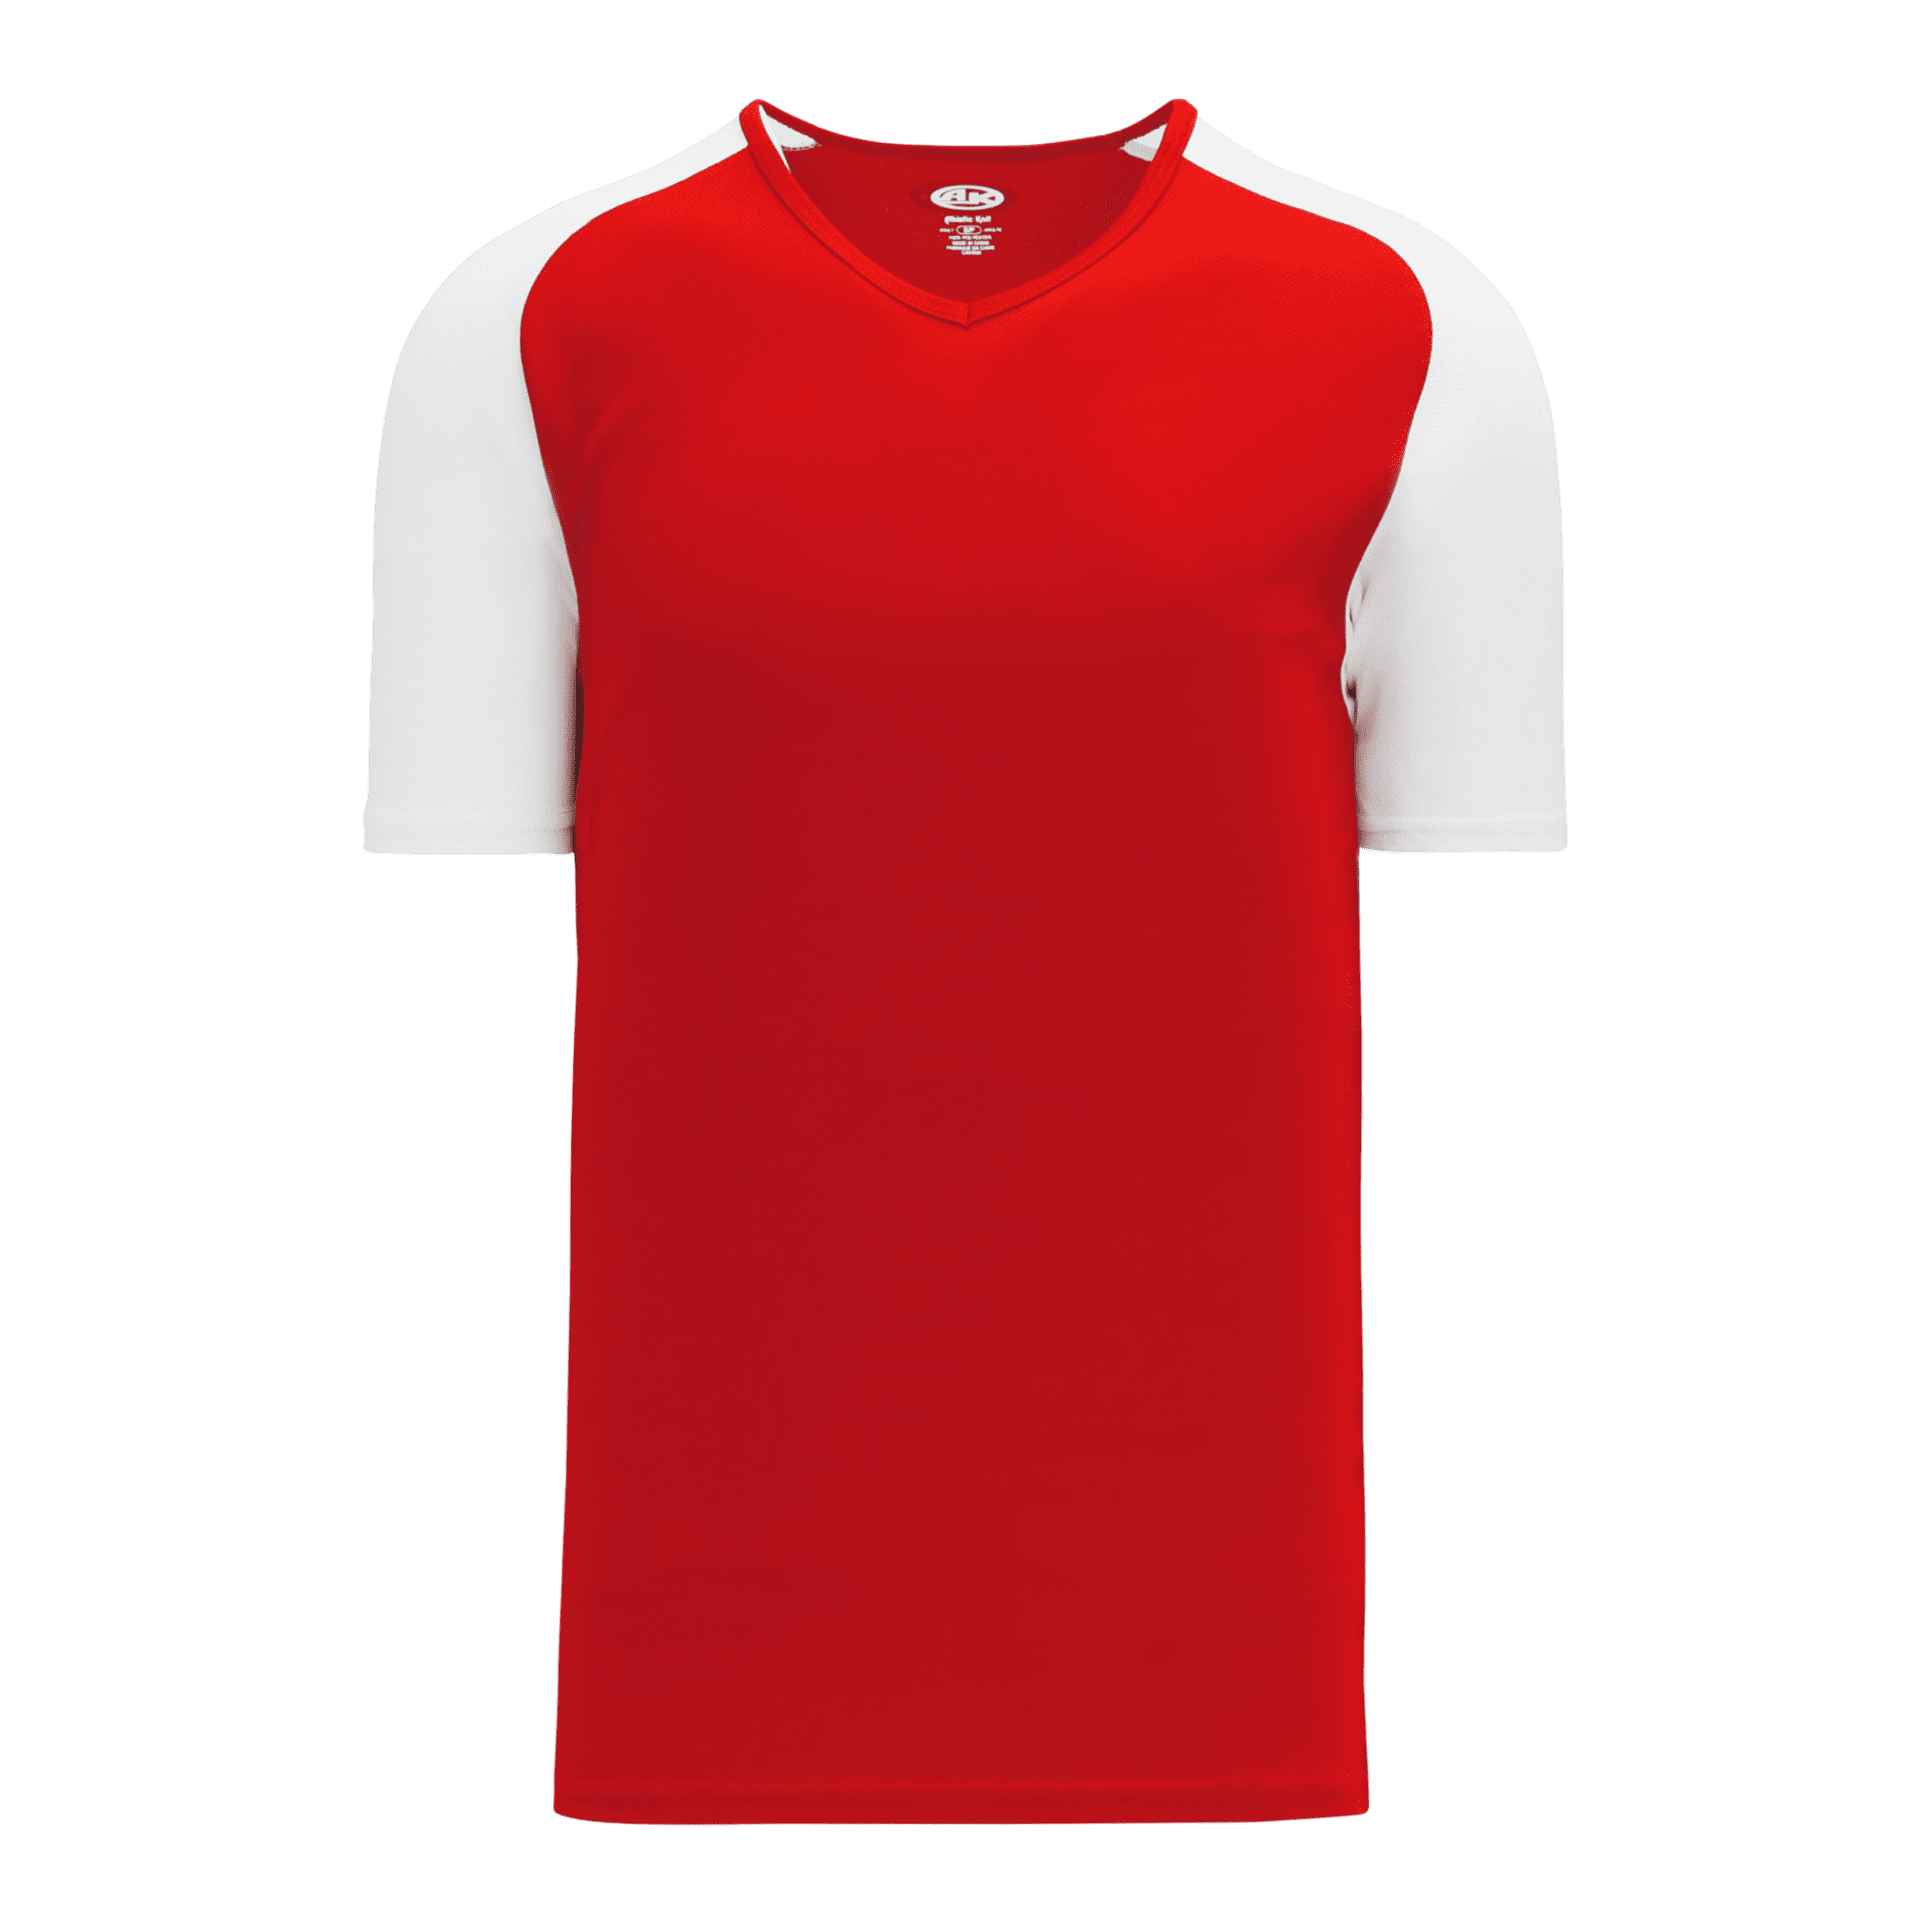 ATHLETIC KNIT DRYFLEX SHORT SLEEVE SHIRT #A1375 Red / White